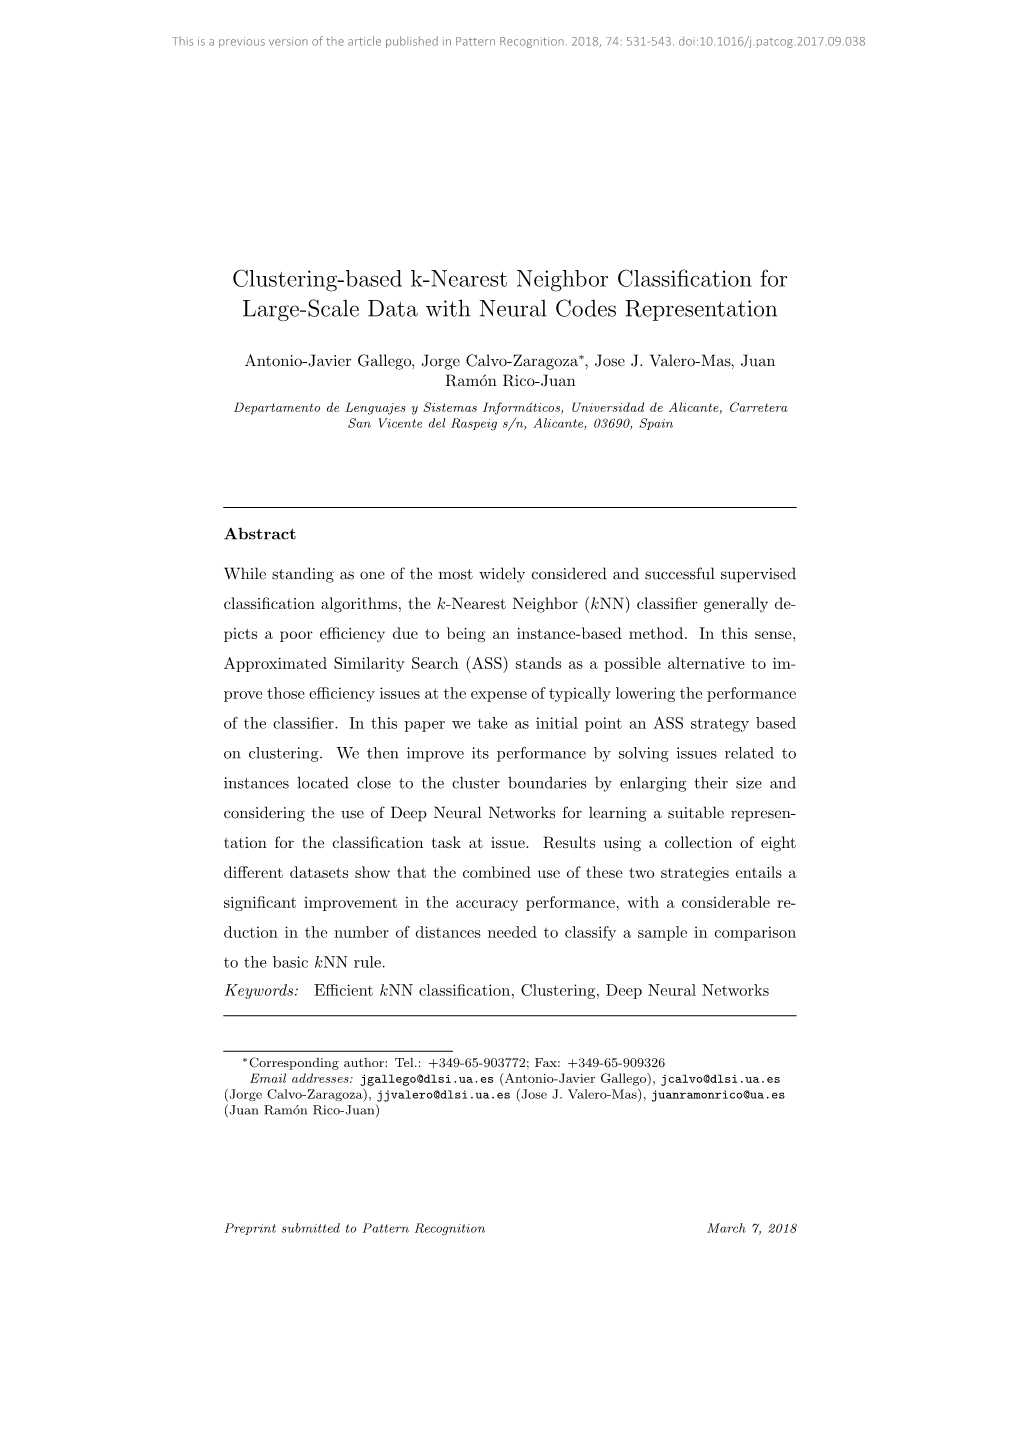 Clustering-Based K-Nearest Neighbor Classification for Large-Scale Data